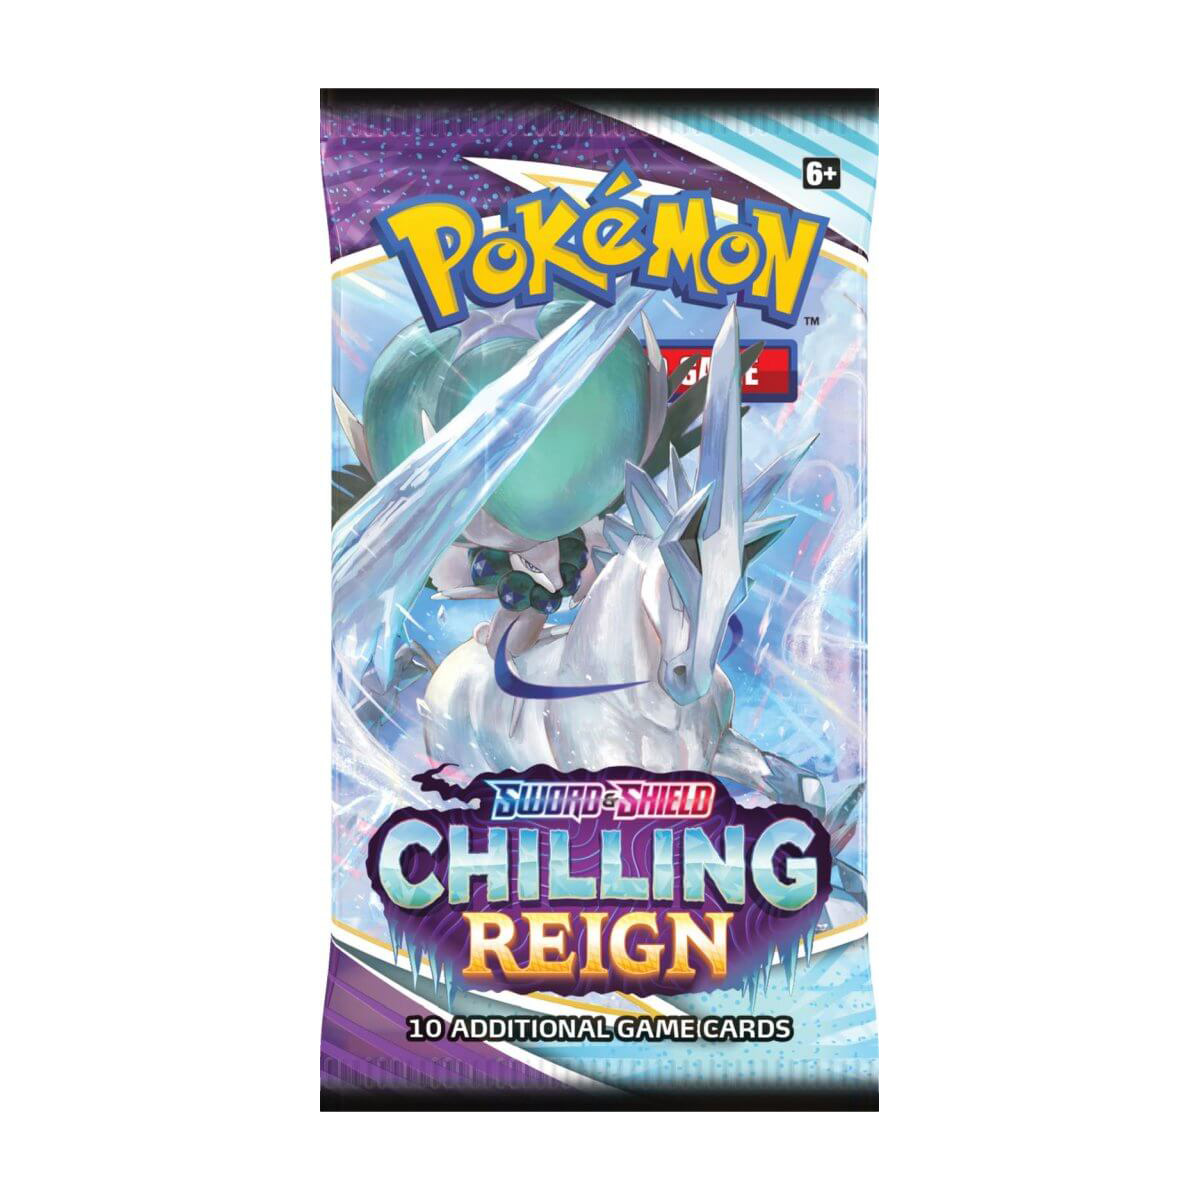 Pokémon TCG: Sword and Shield Chilling Reign Booster Pack